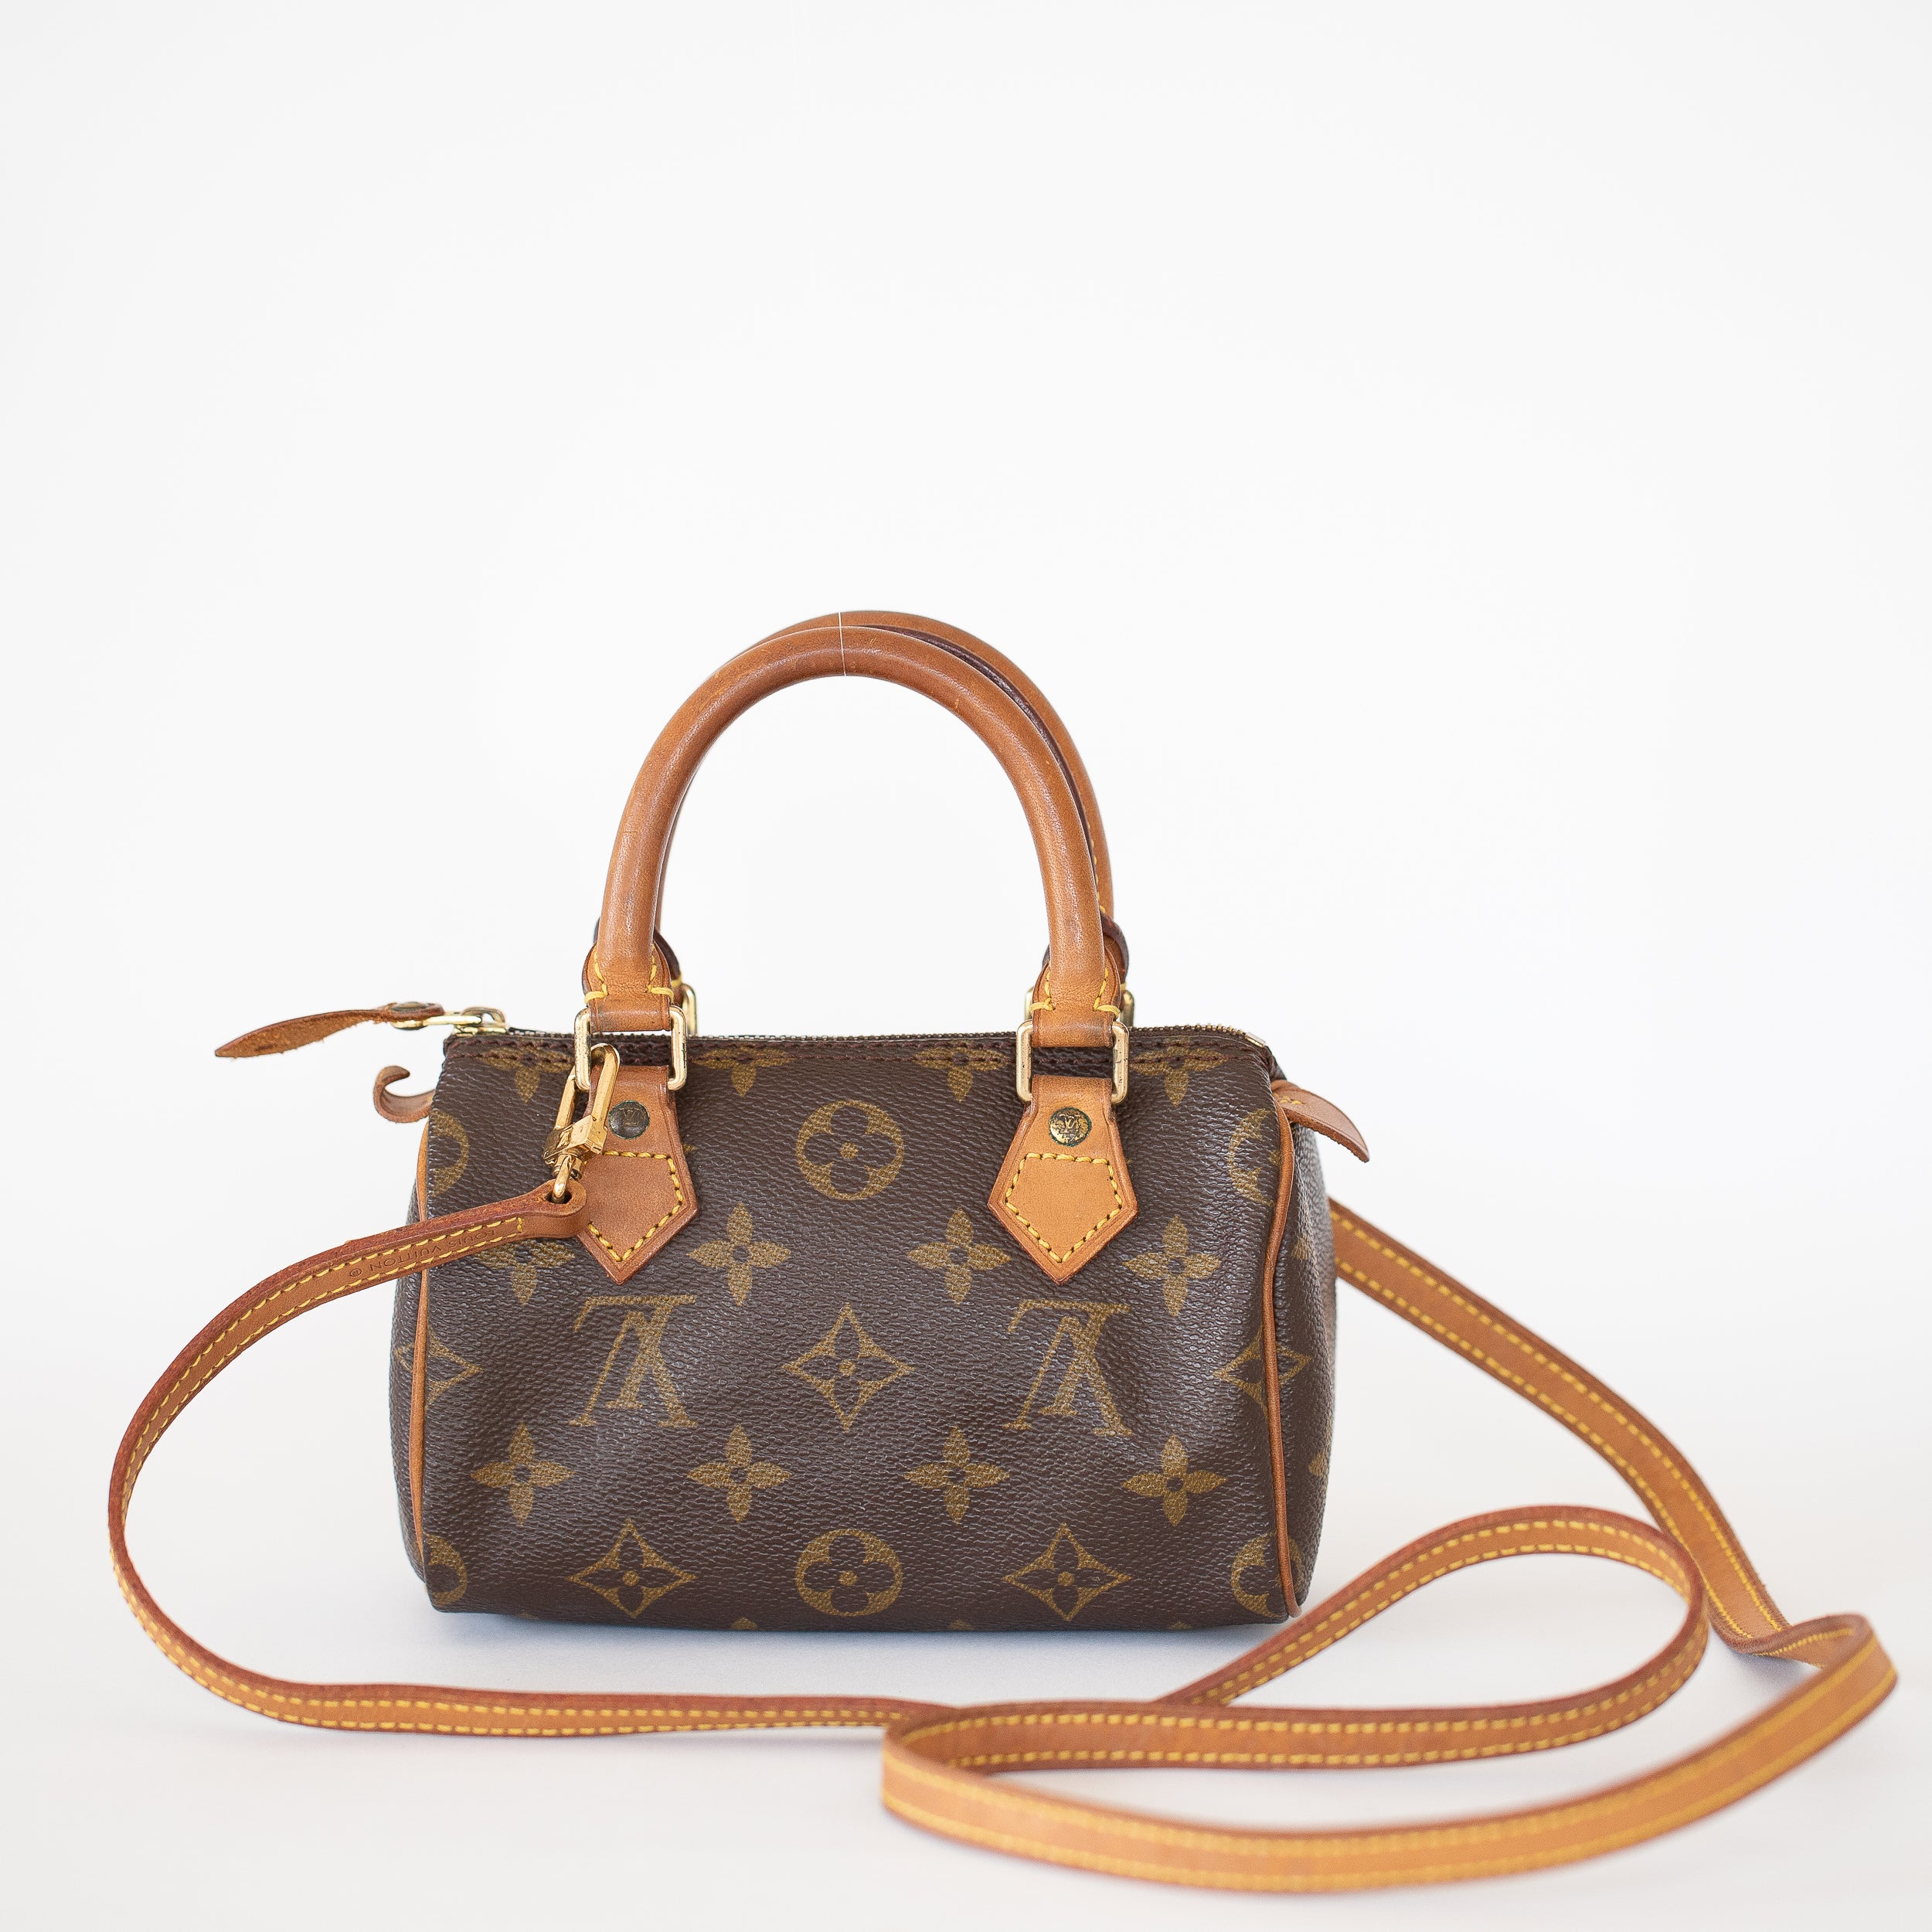 Pre Owned Louis Vuitton Handbags in Australia a Look at the Latest Styles   Trends  Journal